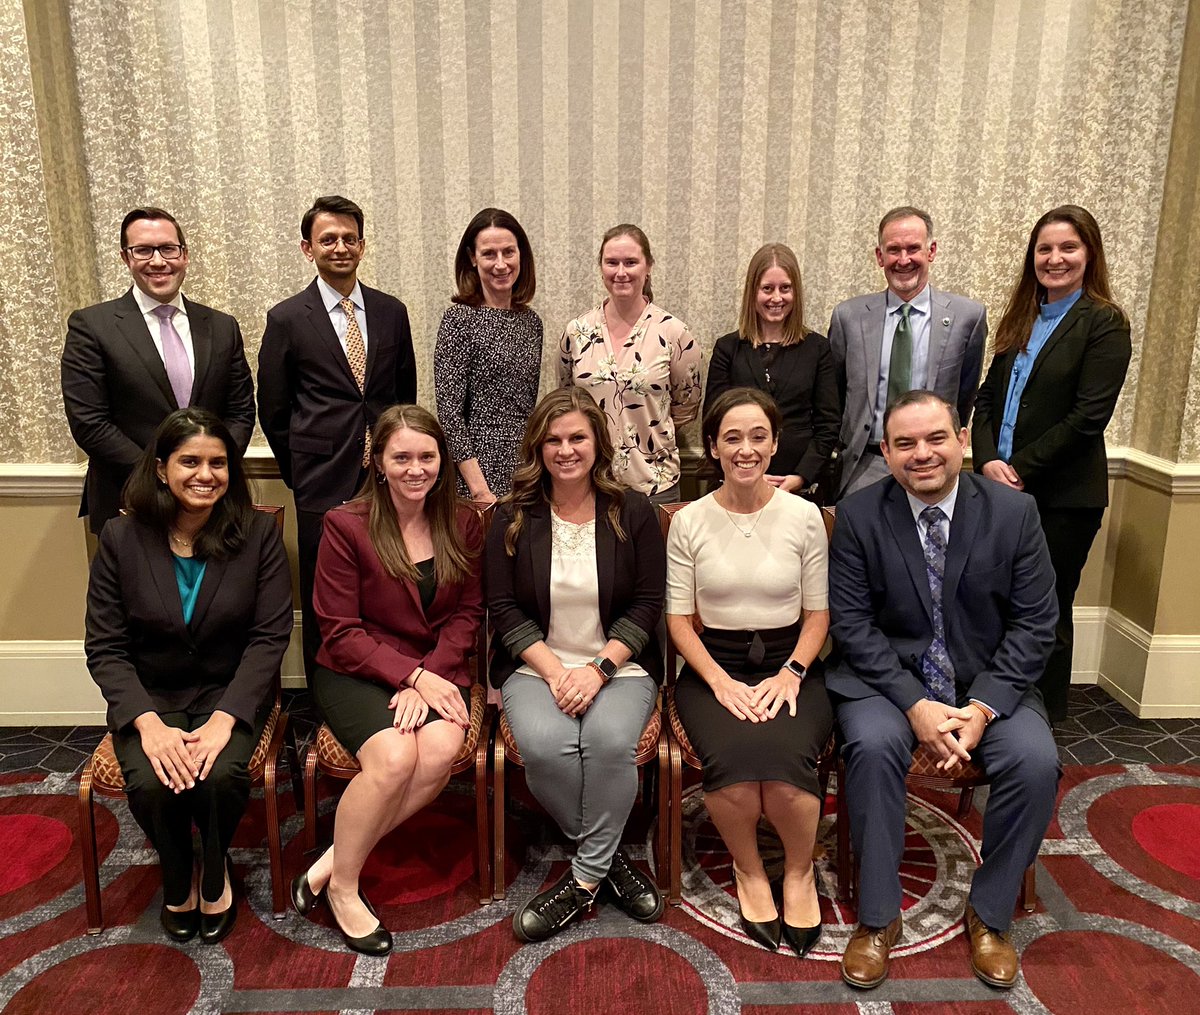 I’m excited to be part of the 2022-2023 Emerging Leaders Program. This group will continue with the mission of inspiring leaders in neurology and fostering their engagement with the American Academy of Neurology.
.
.
#AANleadership @AANmember